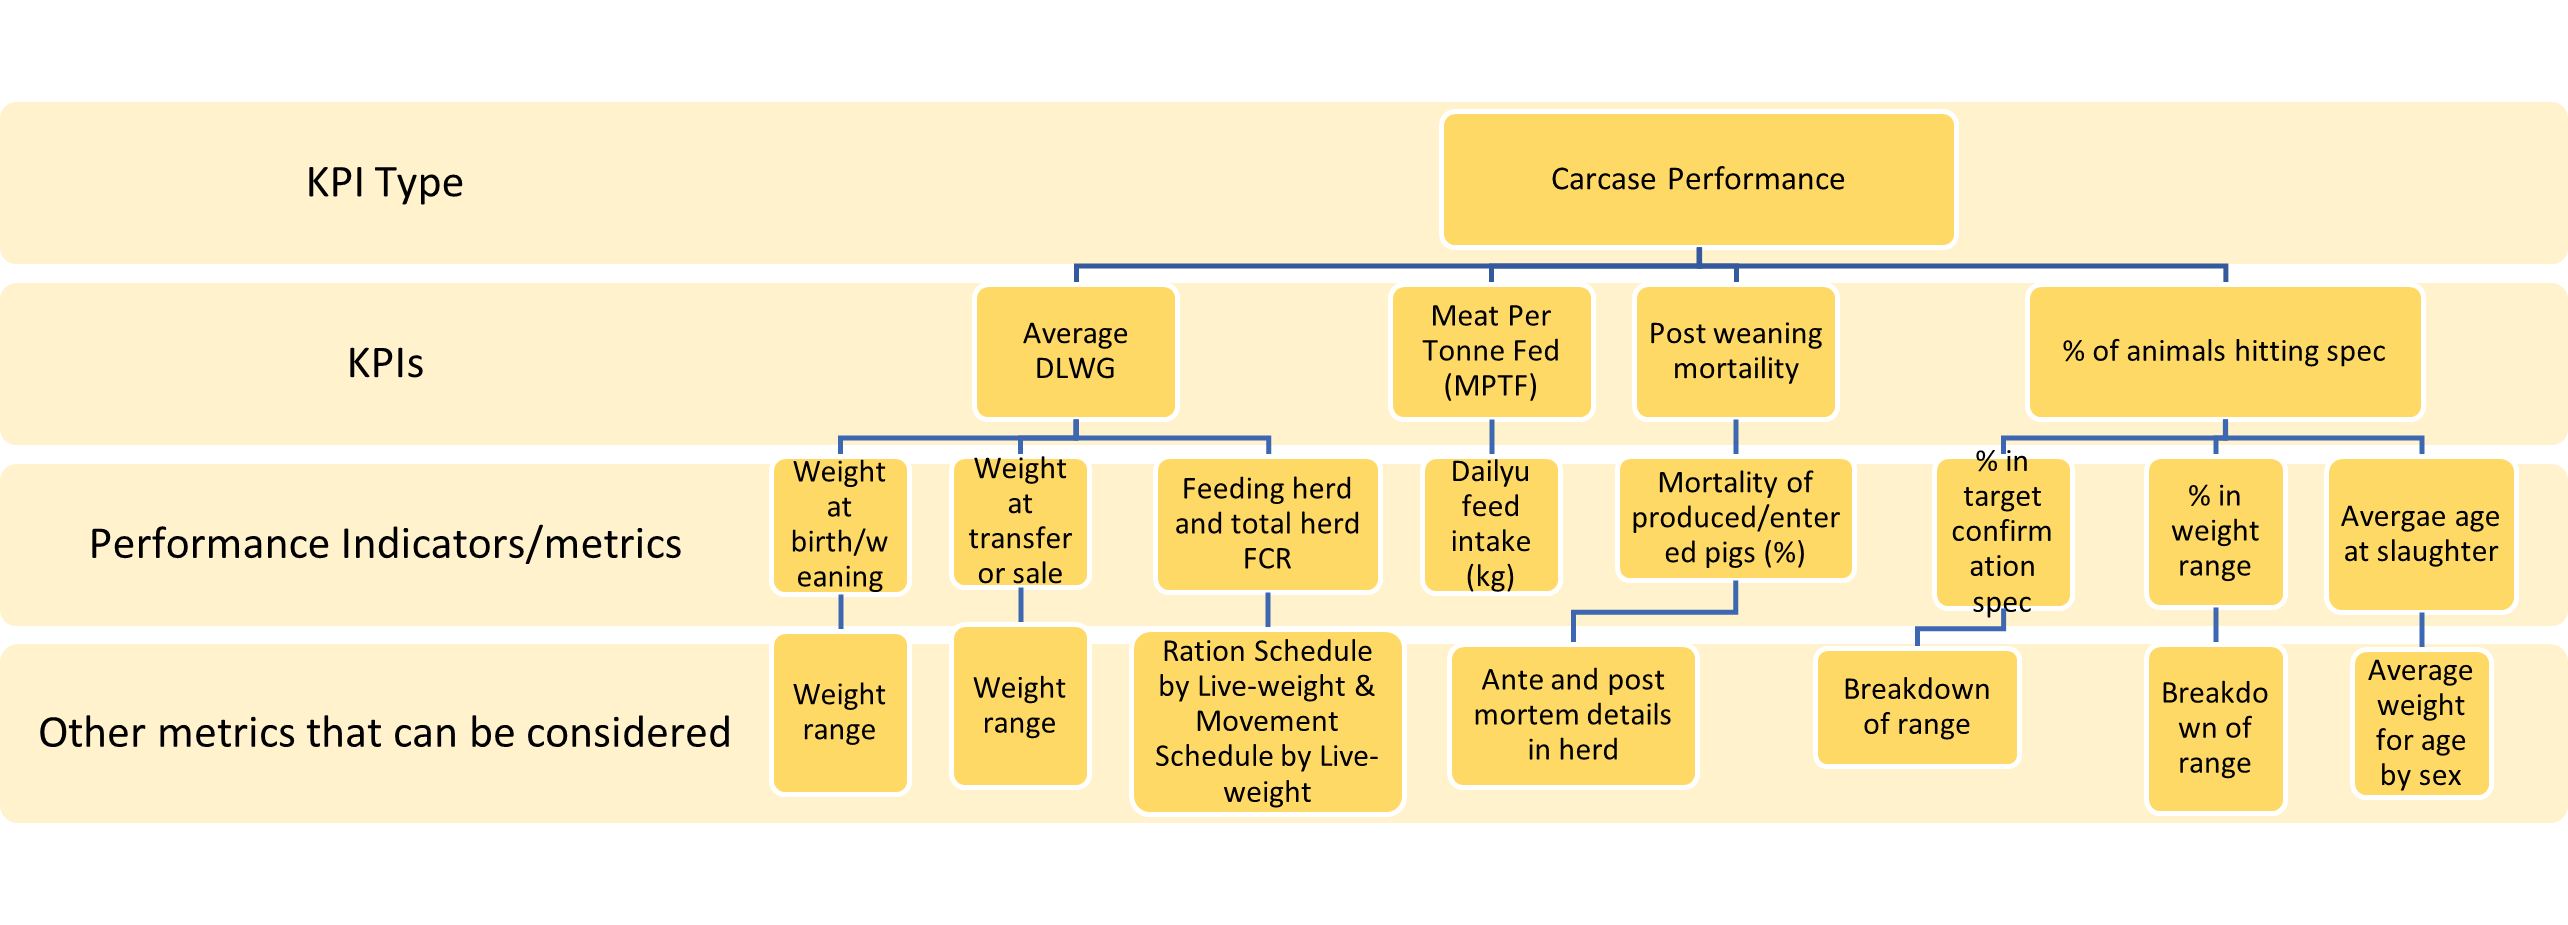 Performance indicators and metrics to monitor pig carcase performance (yield)